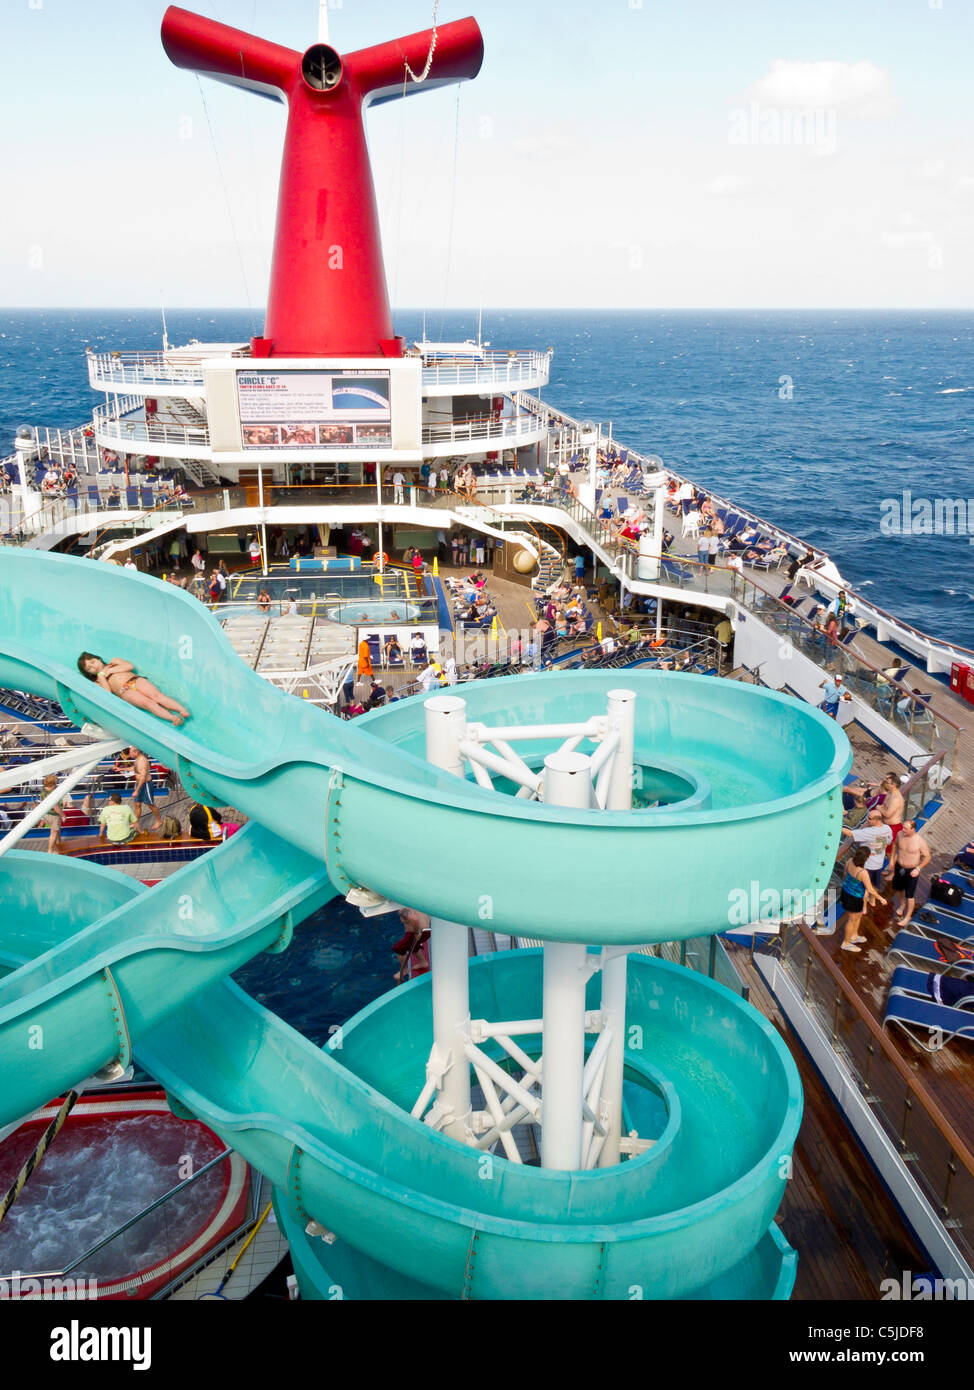 Young girl sliding on water slide on Carnival's Triumph cruise ship in the Gulf of Mexico Stock Photo